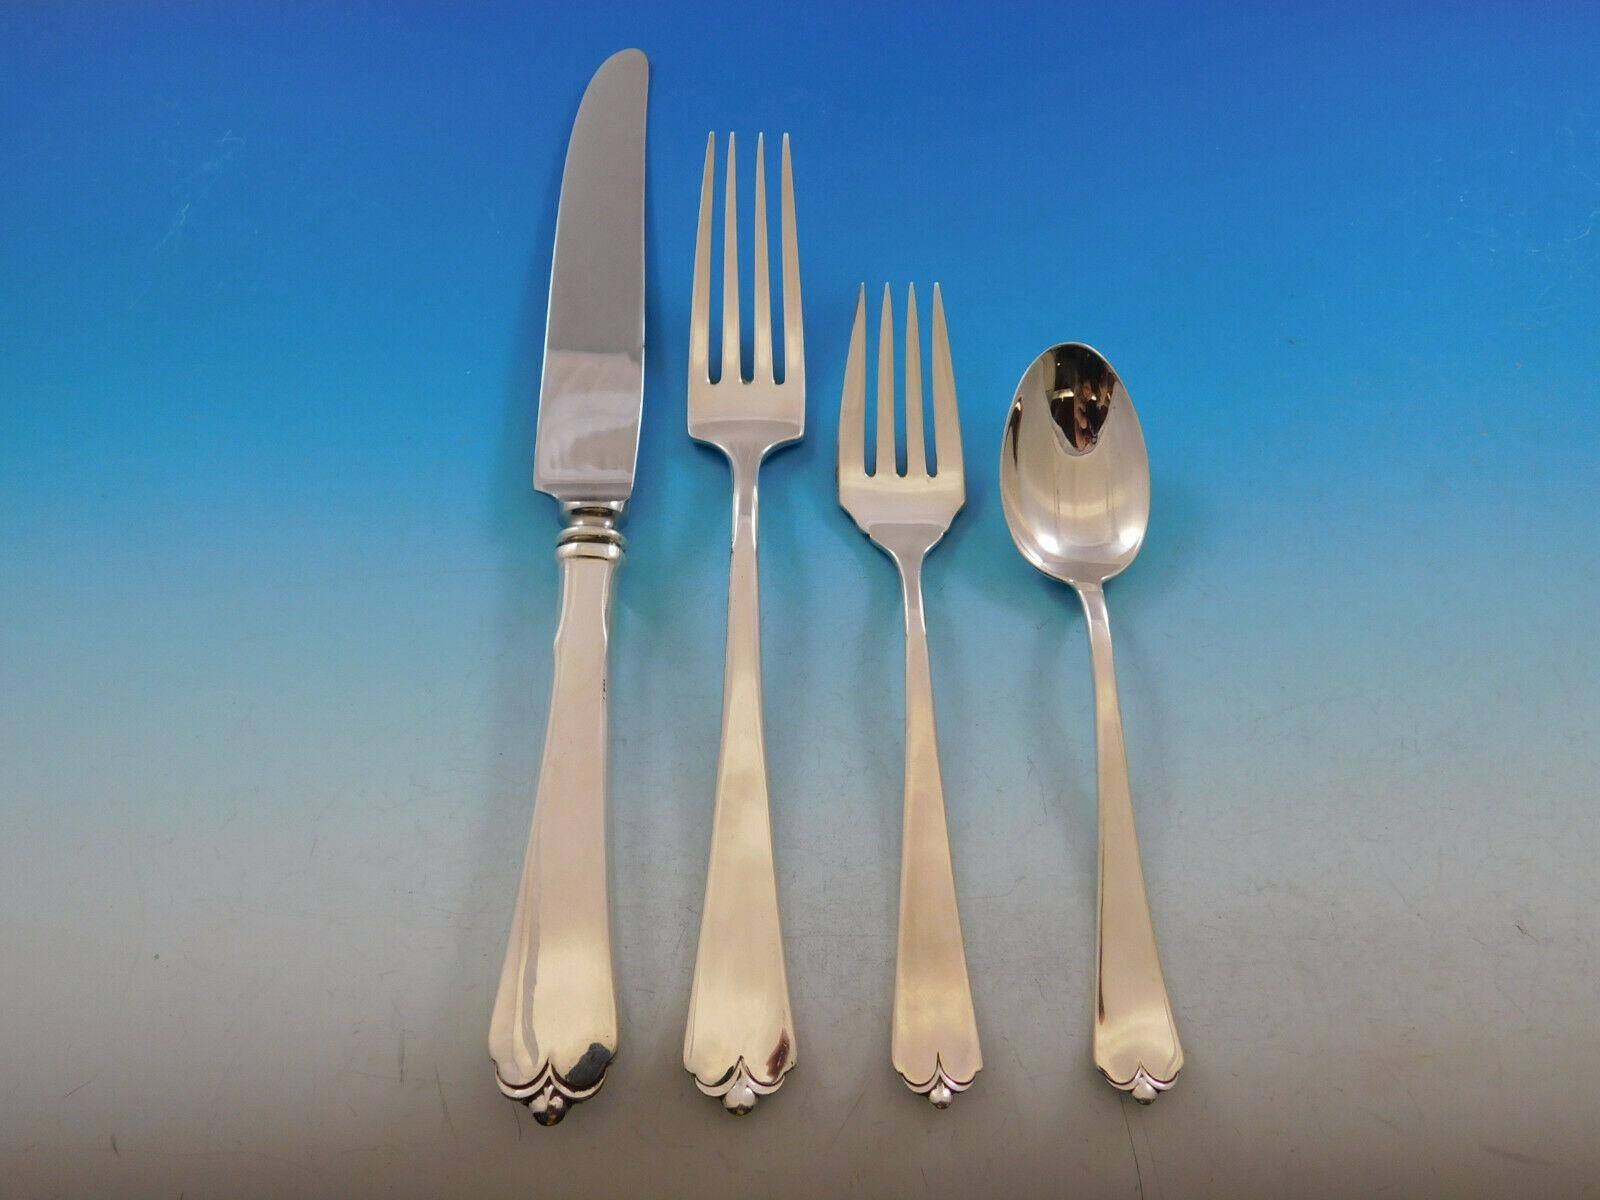 Dinner size lotus by Watson-Wallace circa 1935 sterling silver flatware set, 88 pieces. This set includes:

12 dinner size knives, 9 3/4